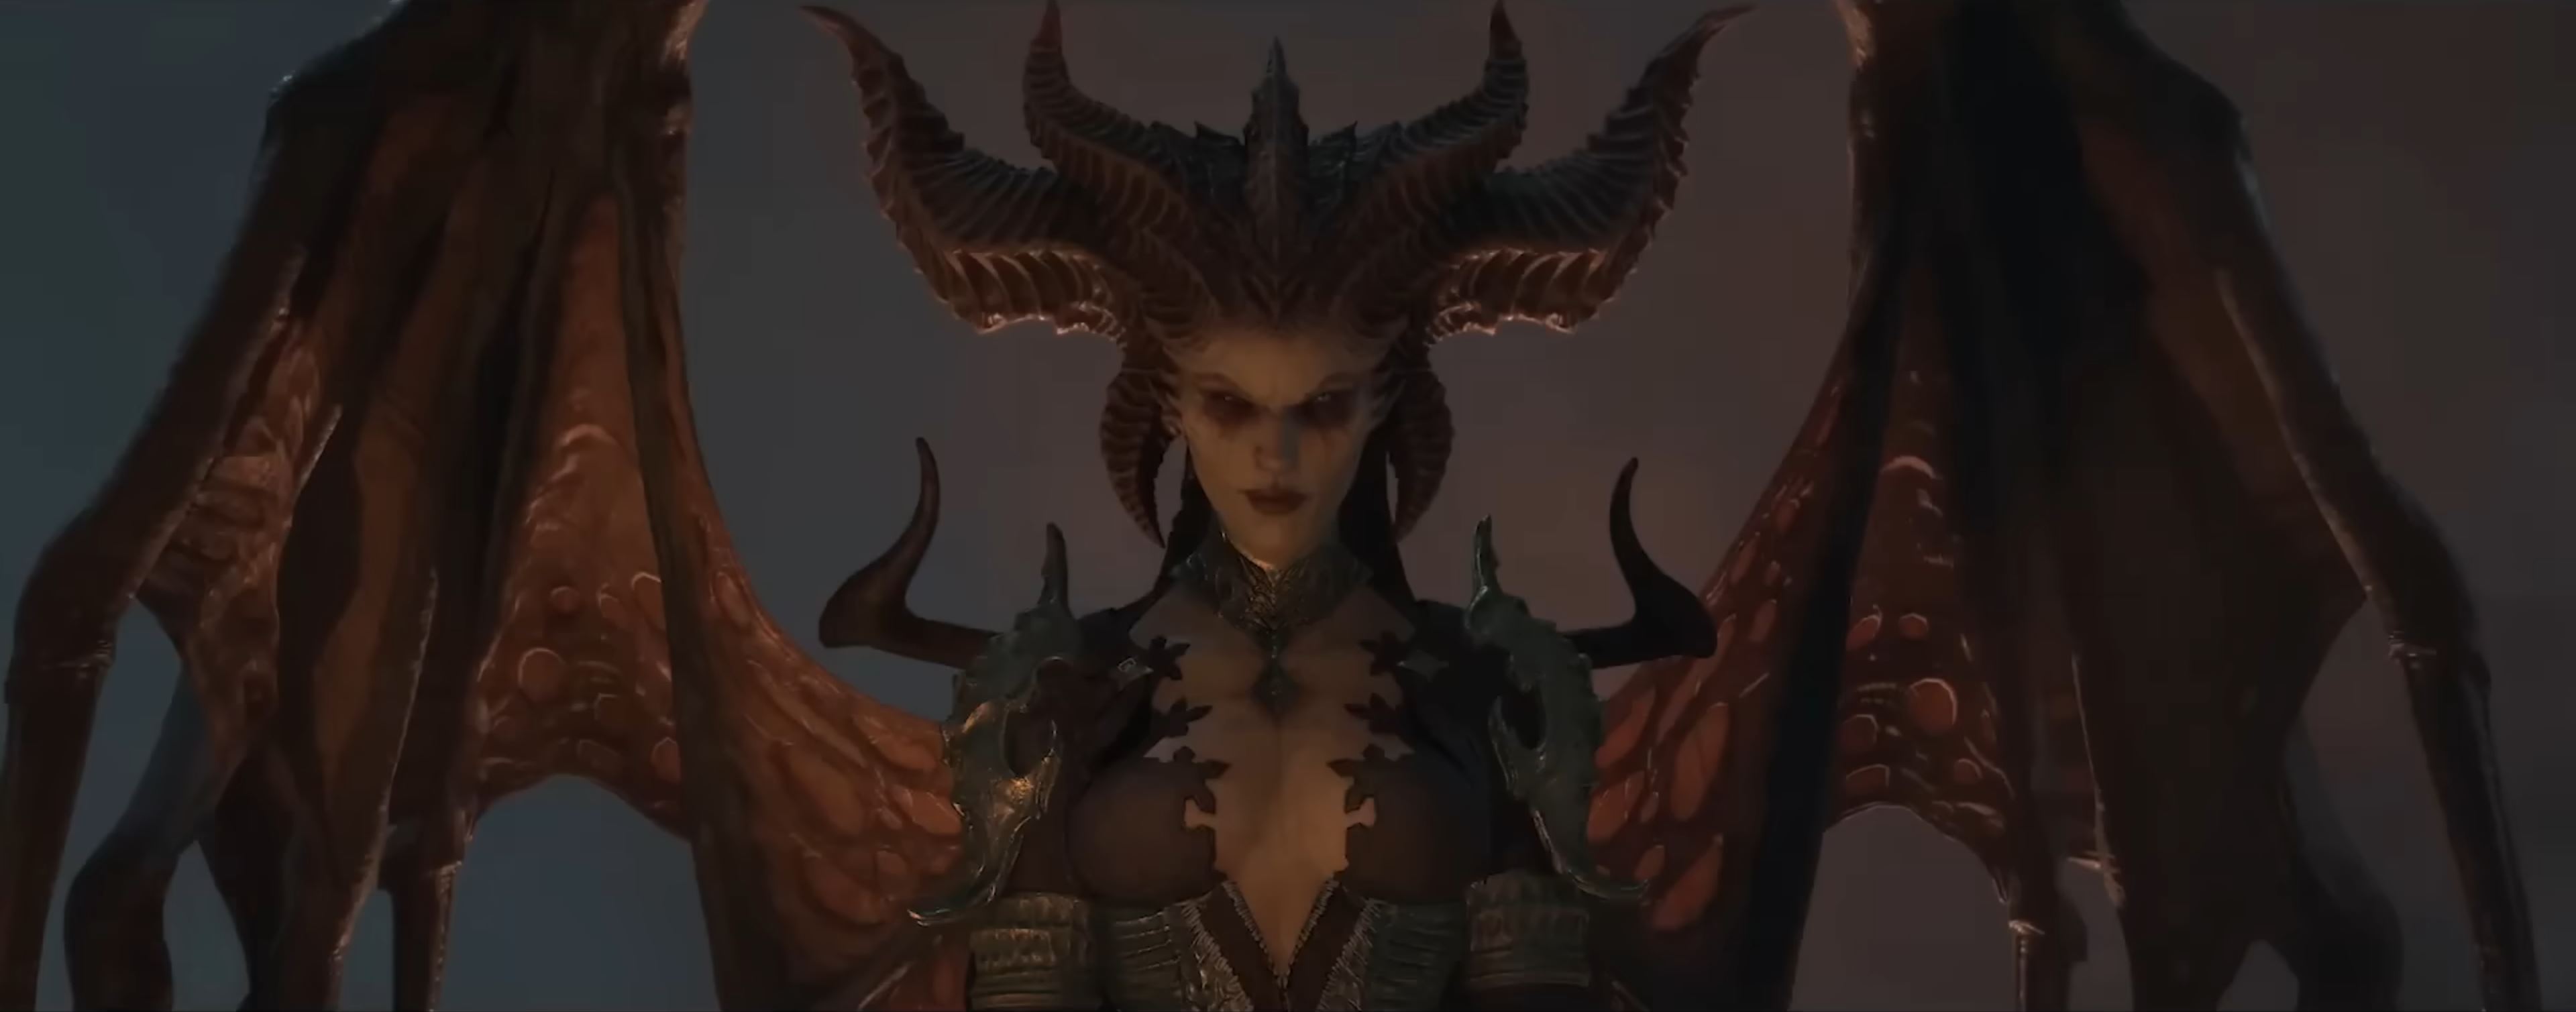 Diablo 4 Microtransactions Explained: Is the Game Pay-to-Win? | Den of Geek